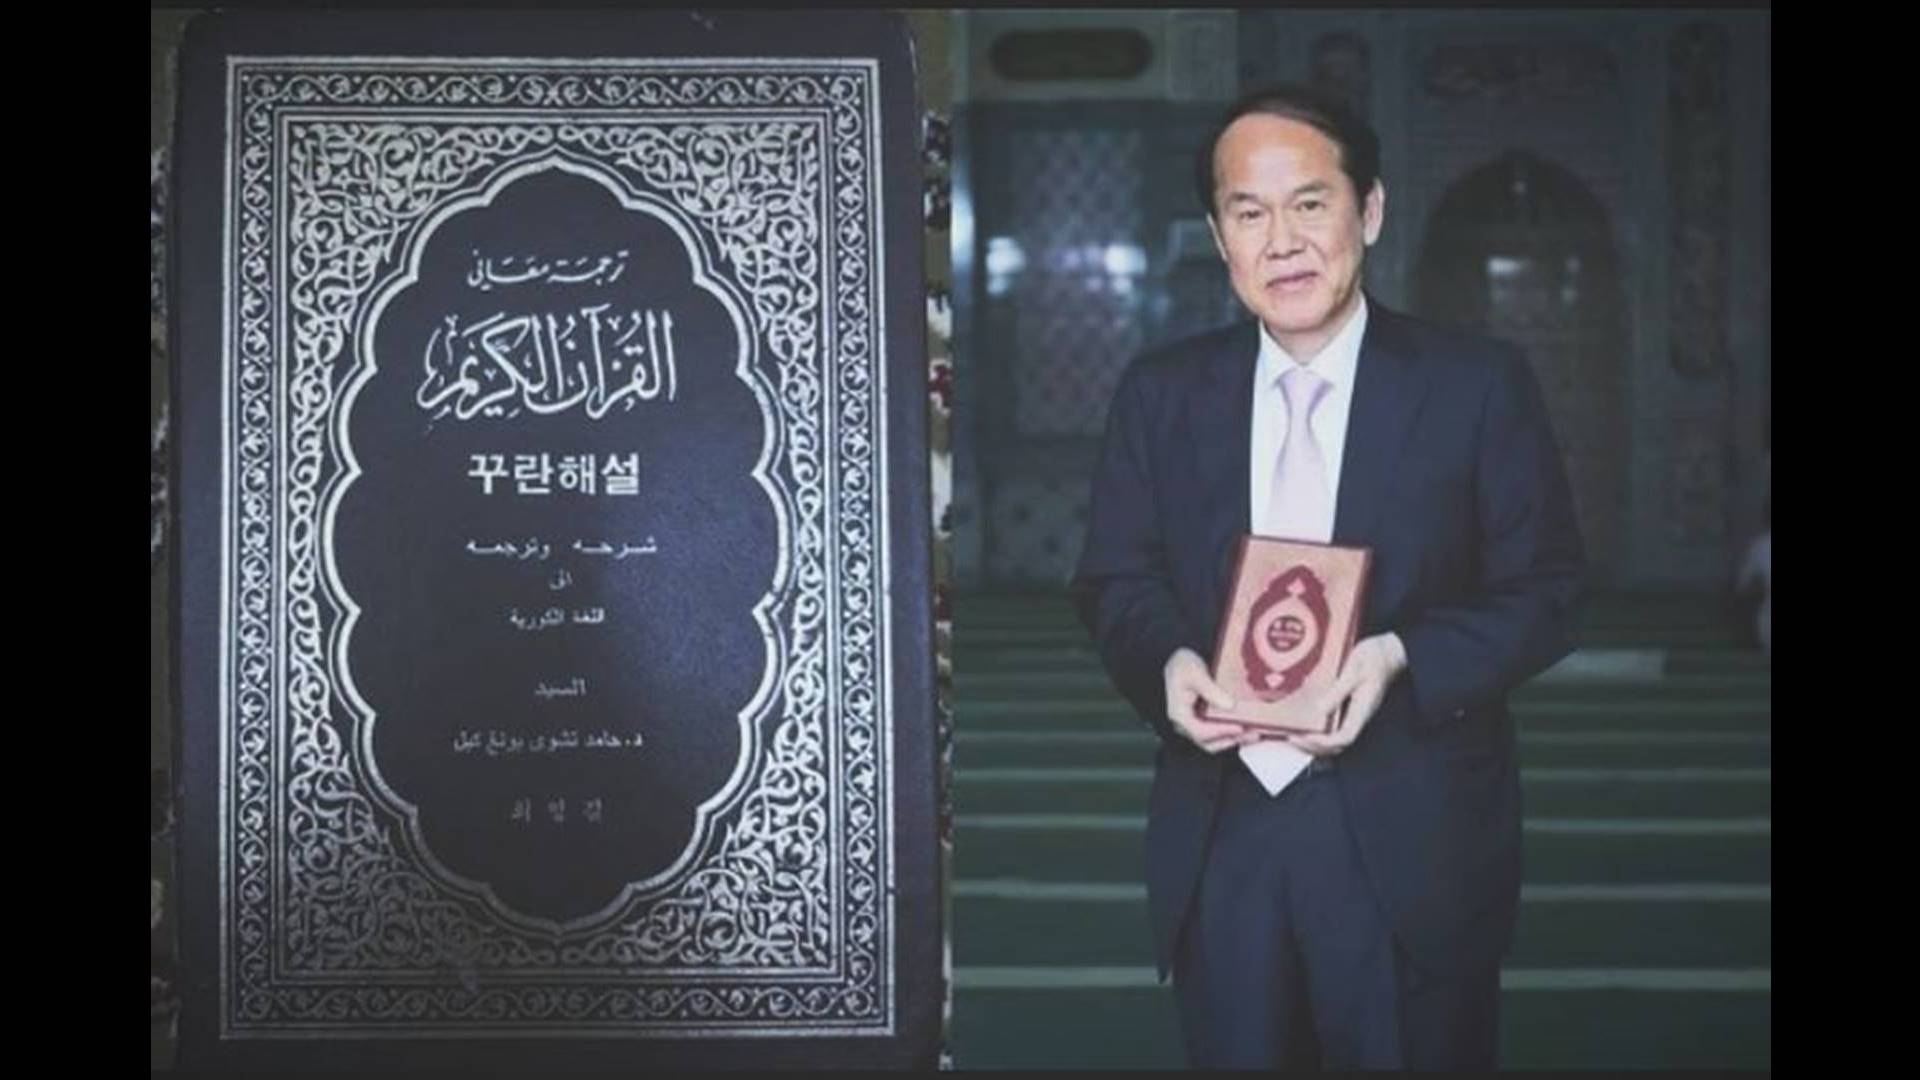 Choi Yong Kil, Korean Muslim who translated the Qur'an into Korean for the first time